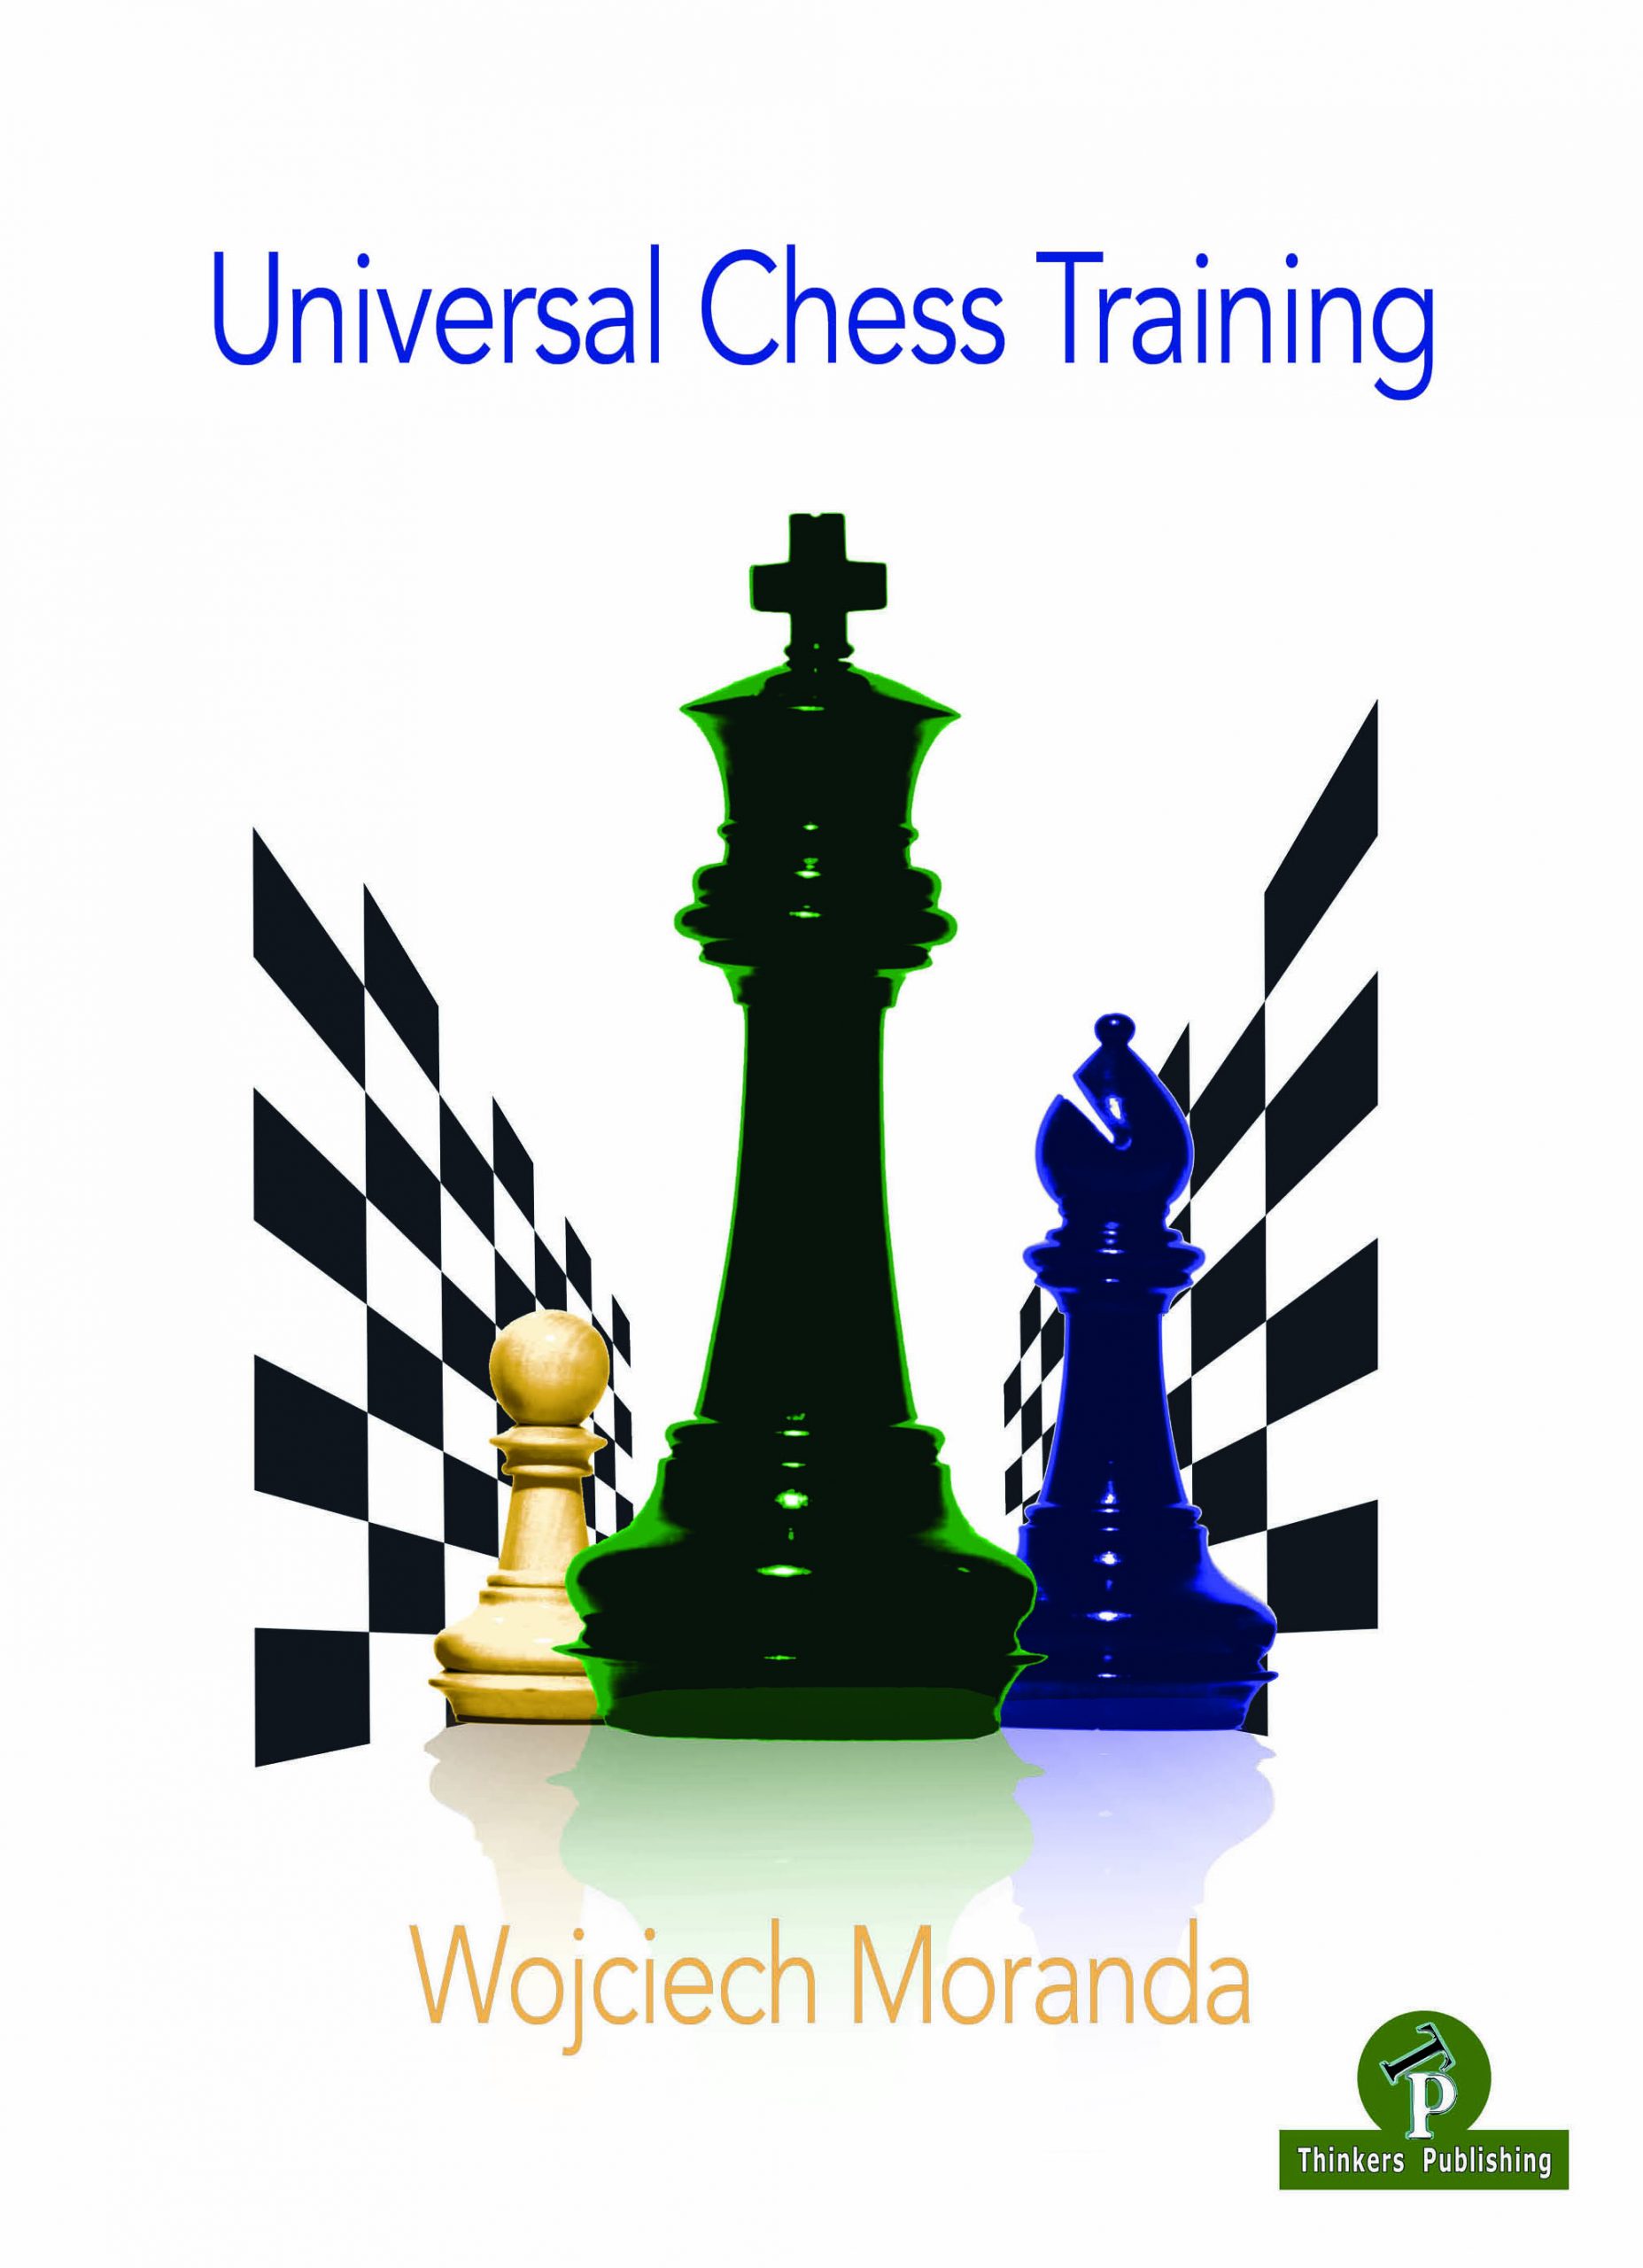 Everything You Need To Know About Chess Coaching: How (And Why) To